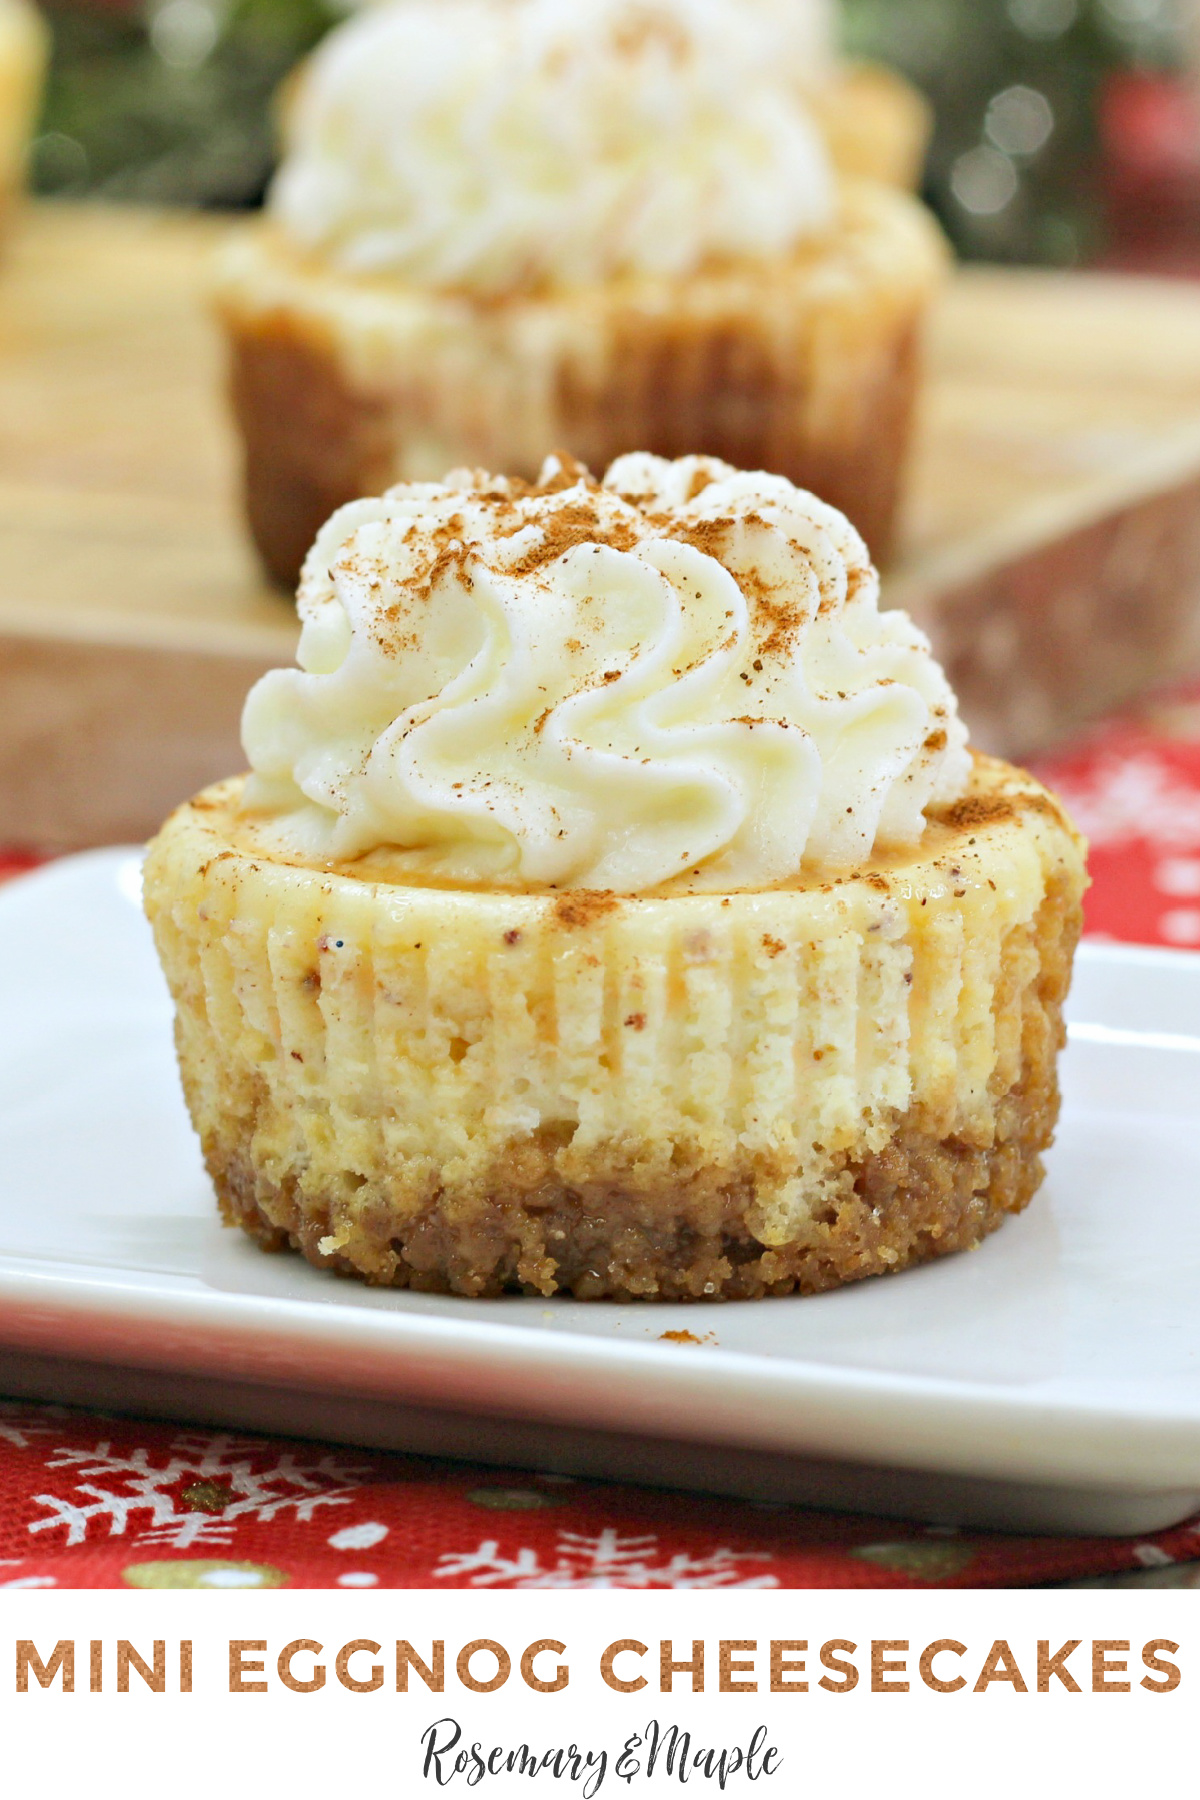 These yummy little eggnog cheesecakes are the perfect Christmas dessert! They're easy to make and only require a few simple ingredients.